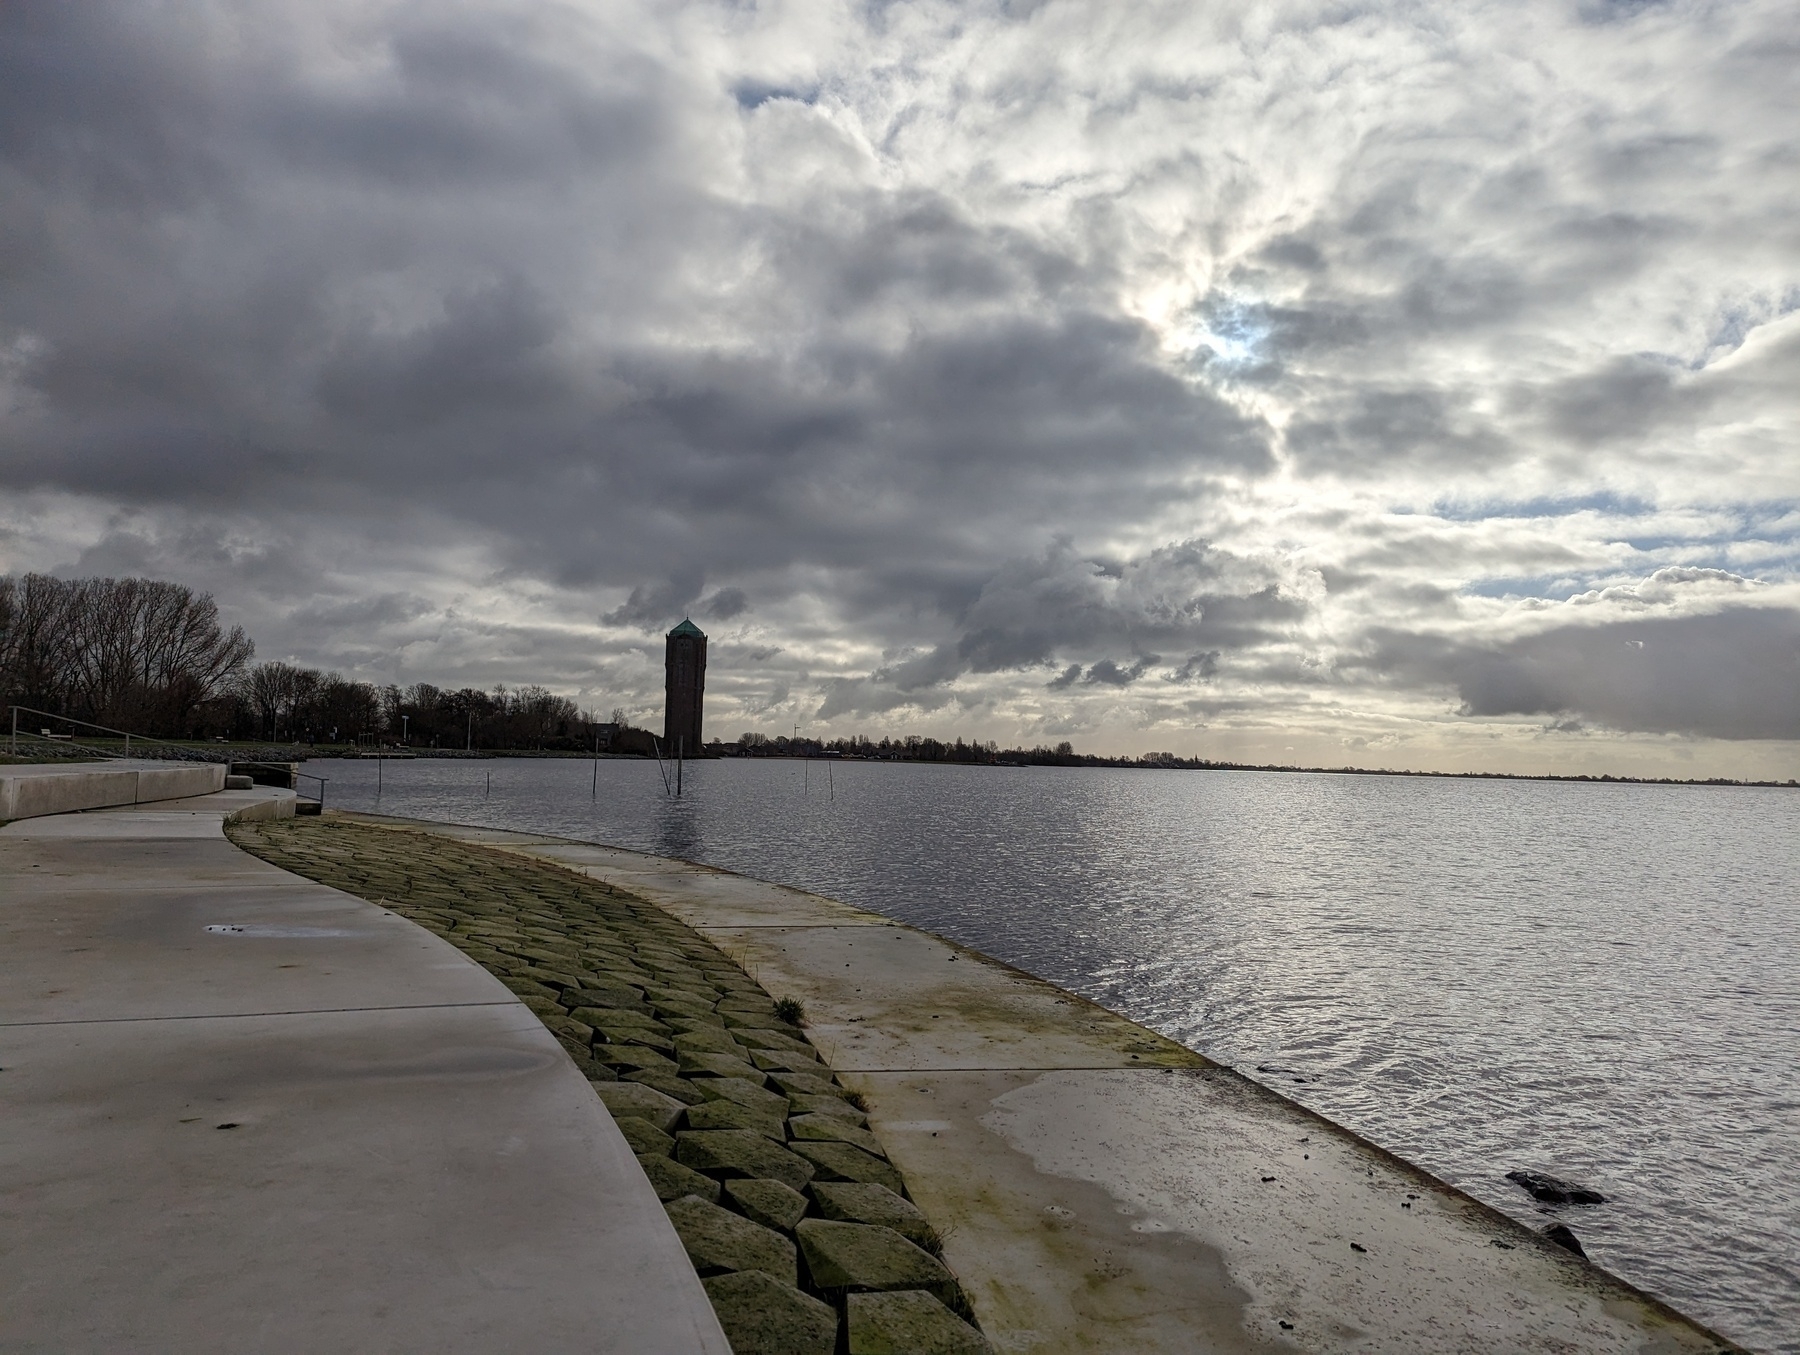 A concrete viewing area at the Westeindeplassen lake, with the watertoren - water tower - in the distance.